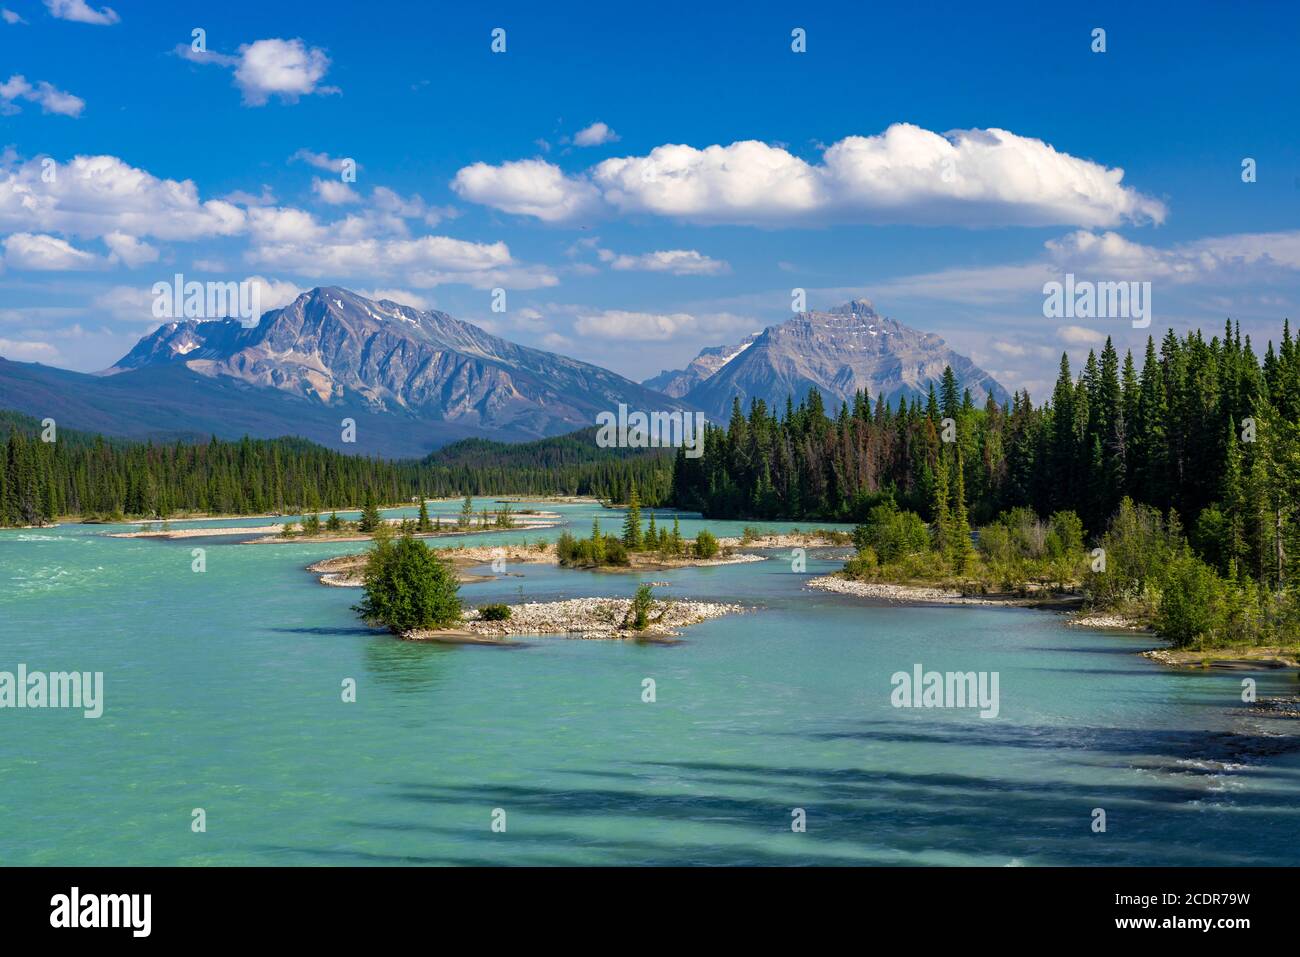 The Athabasca River along the icefields Parkway near Jasper, Alberta, Canada Stock Photo